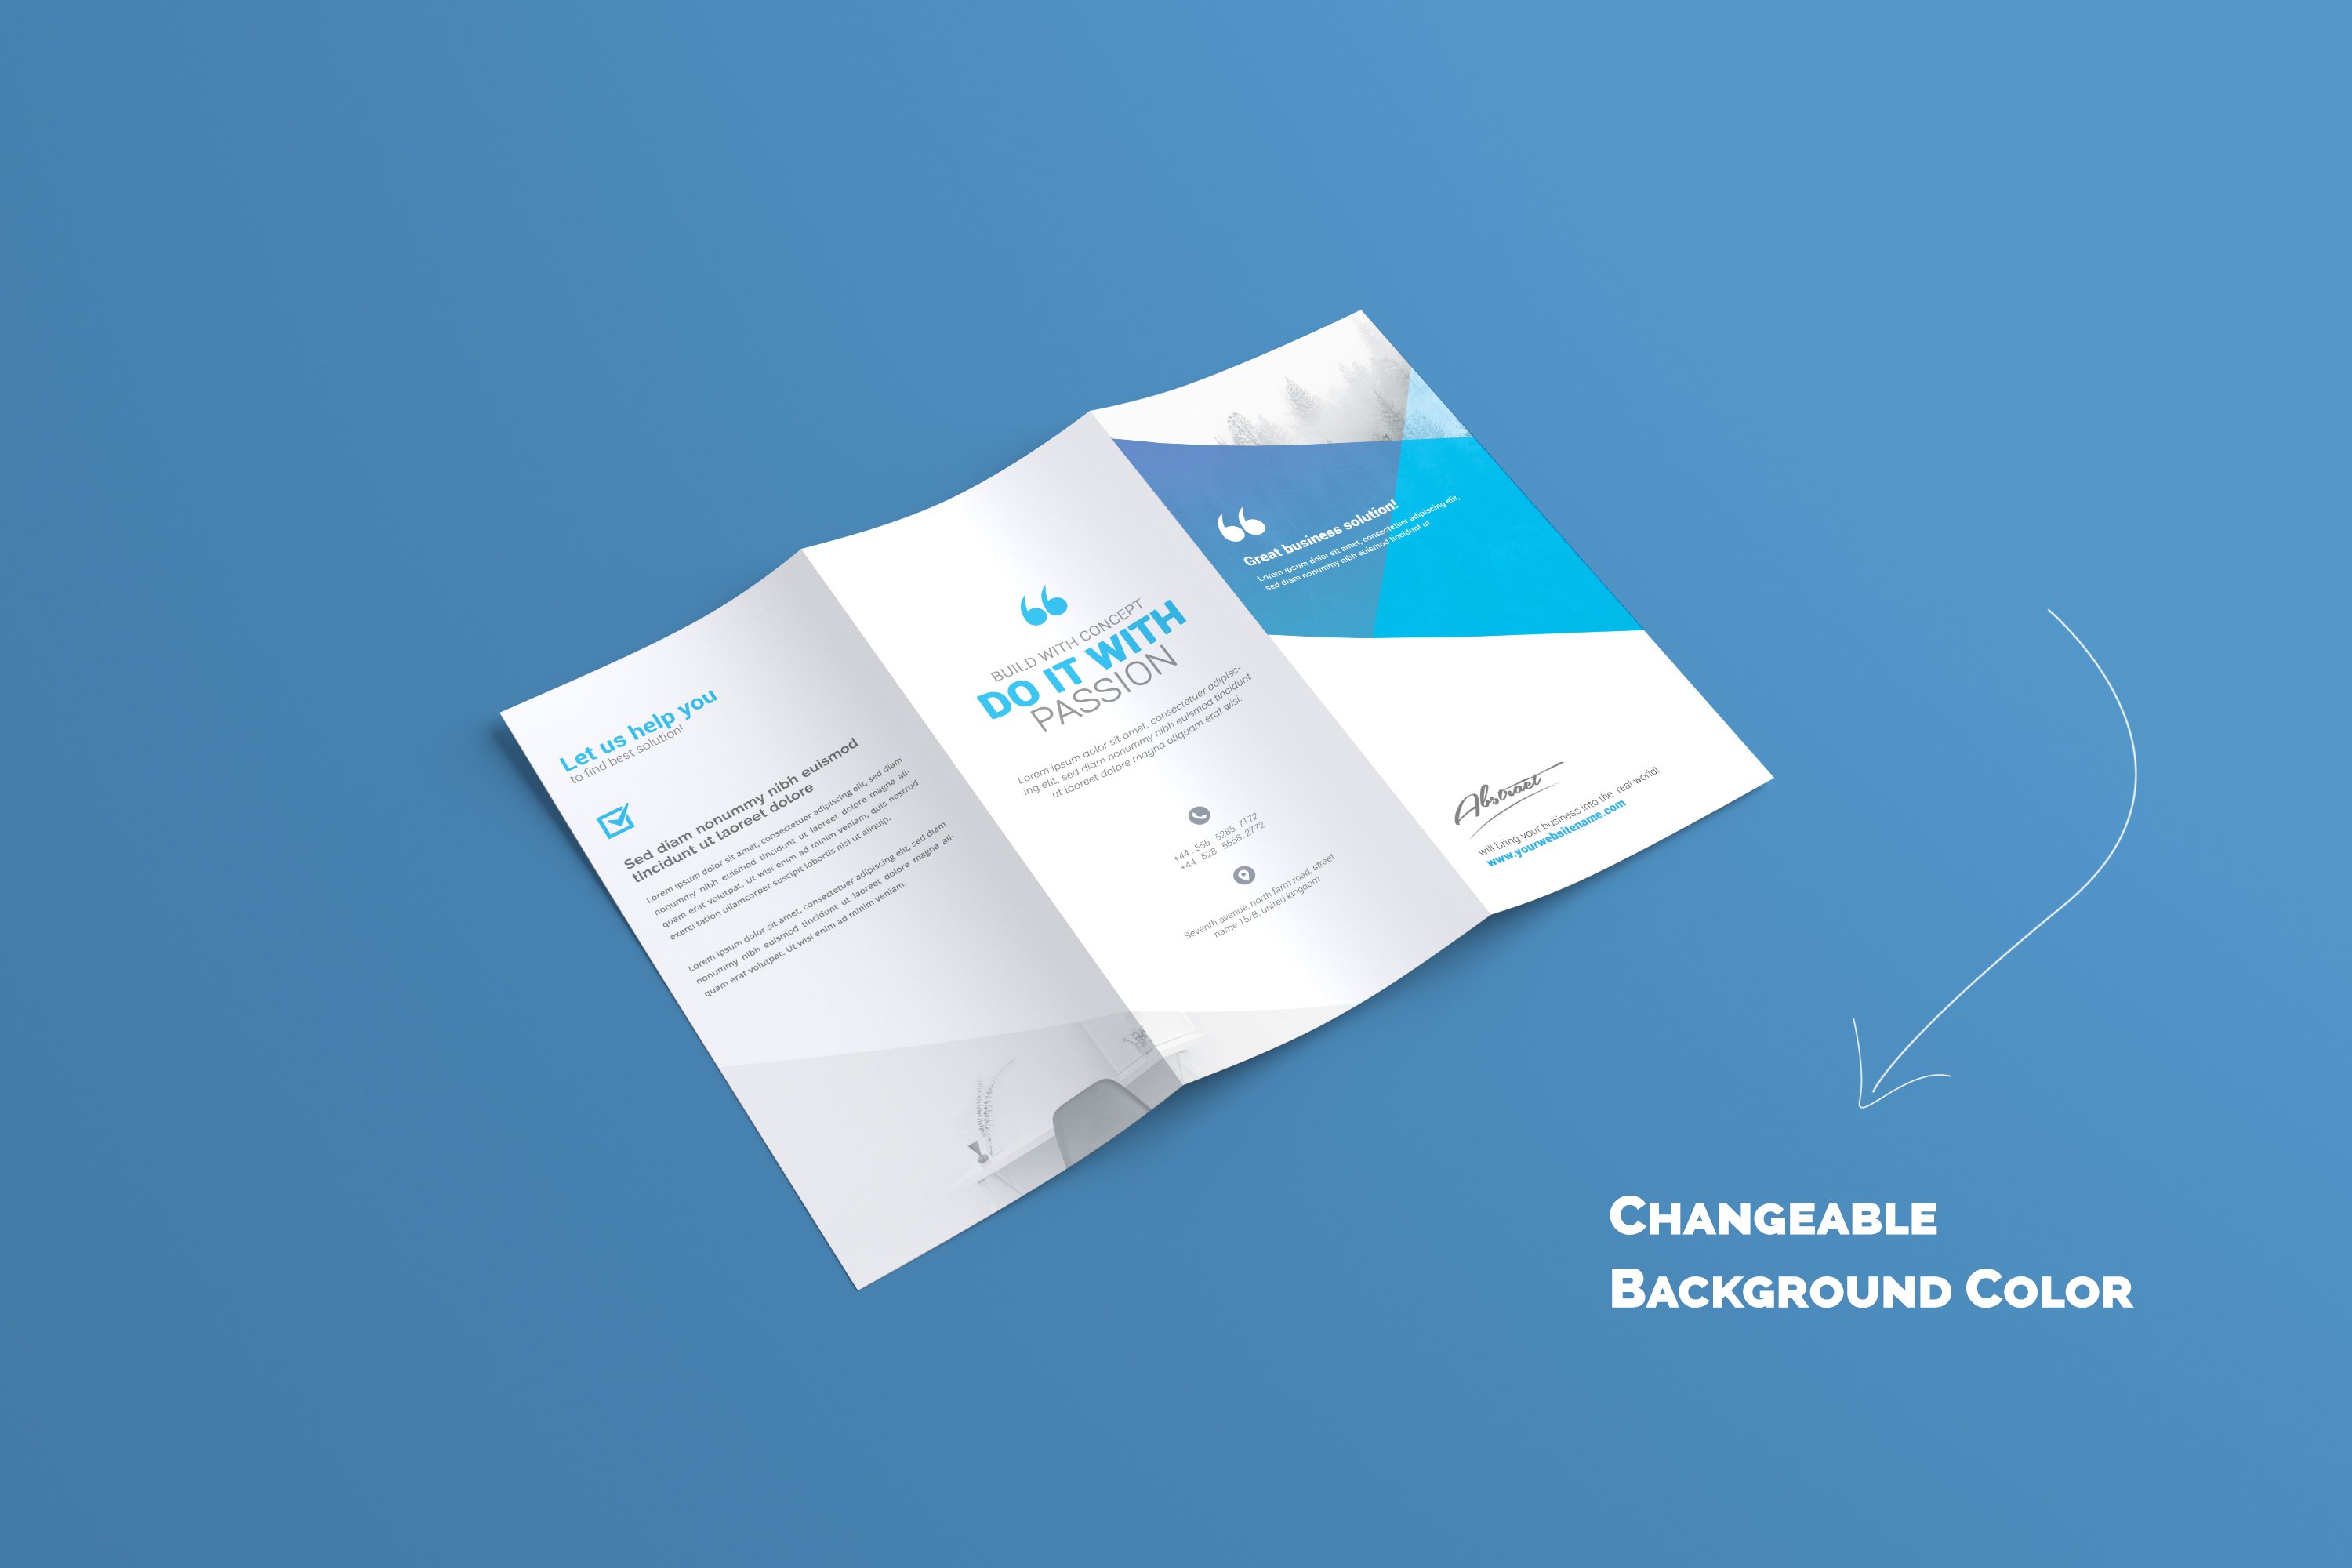 A4 Trifold Brochure Mock-Ups cover image.